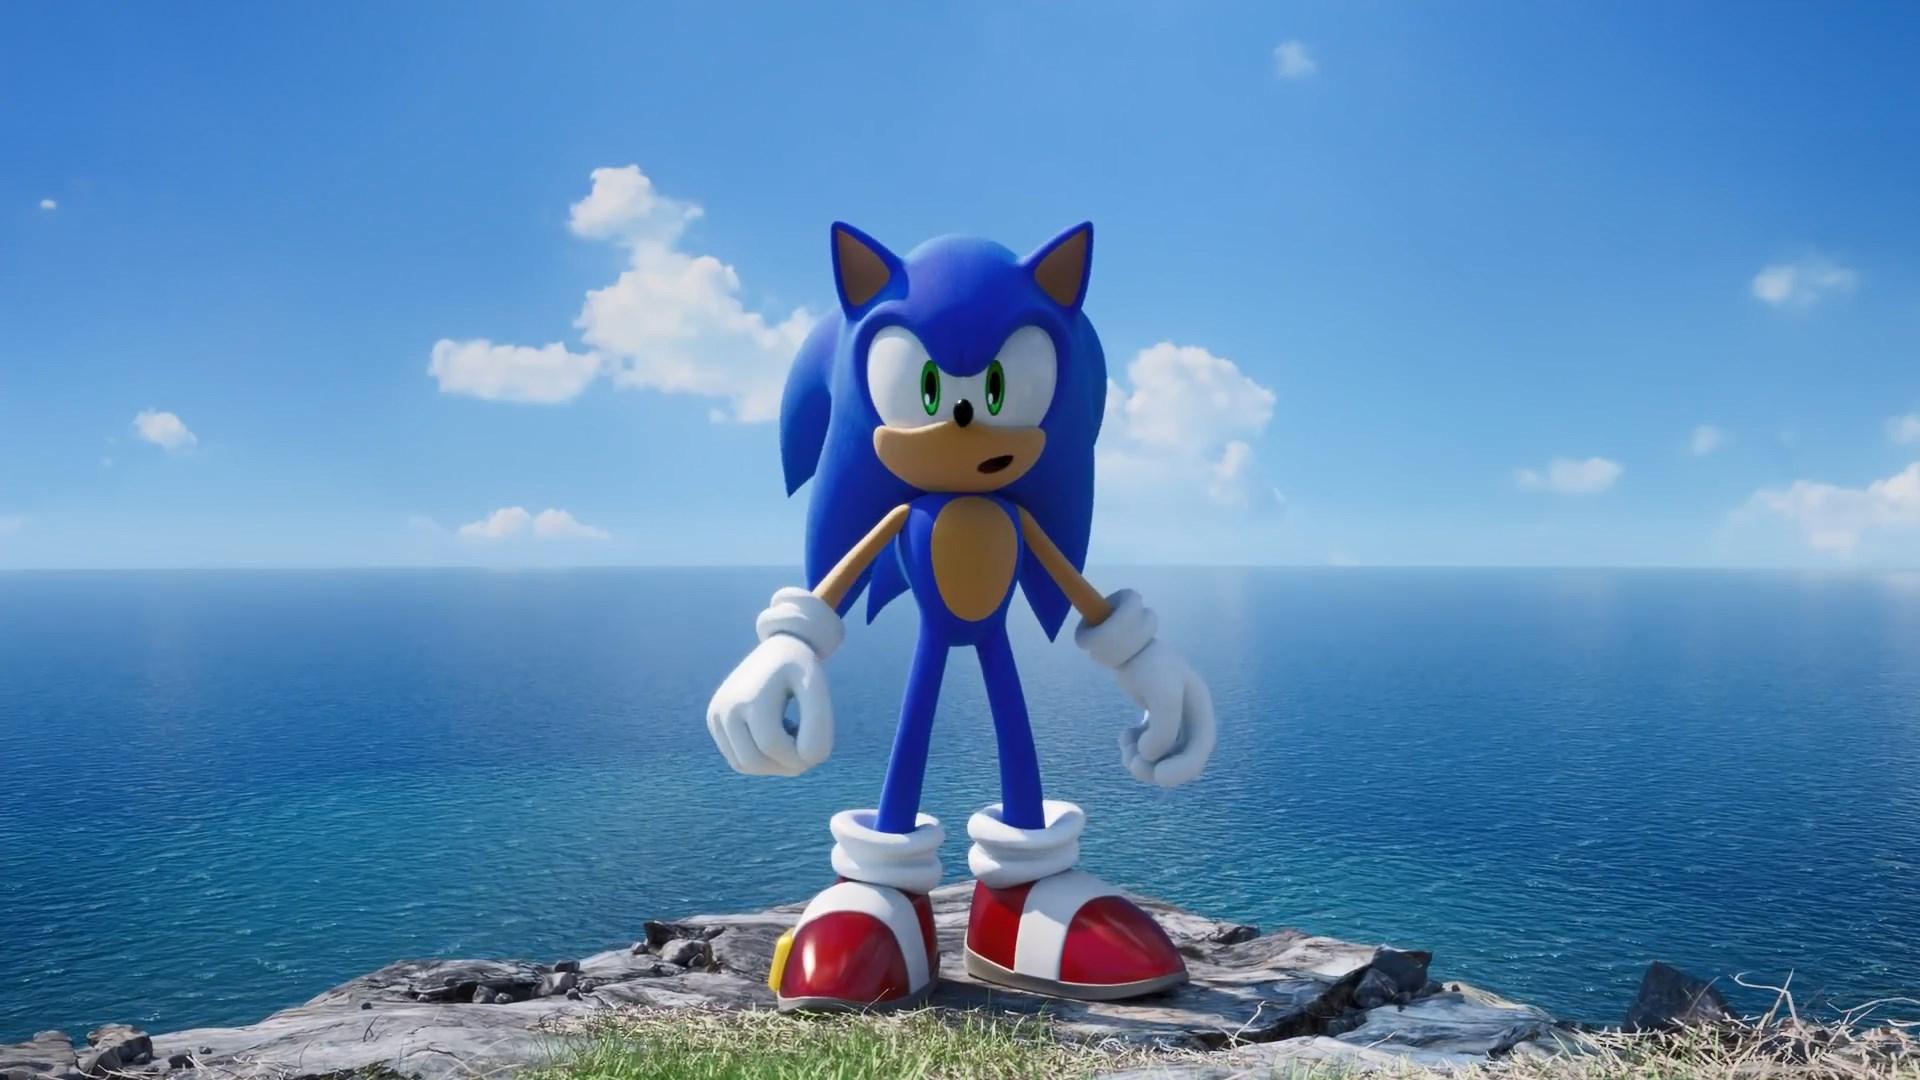 Fan Casting Sage (Sonic the Hedgehog) as Eggfam in Sonic Character